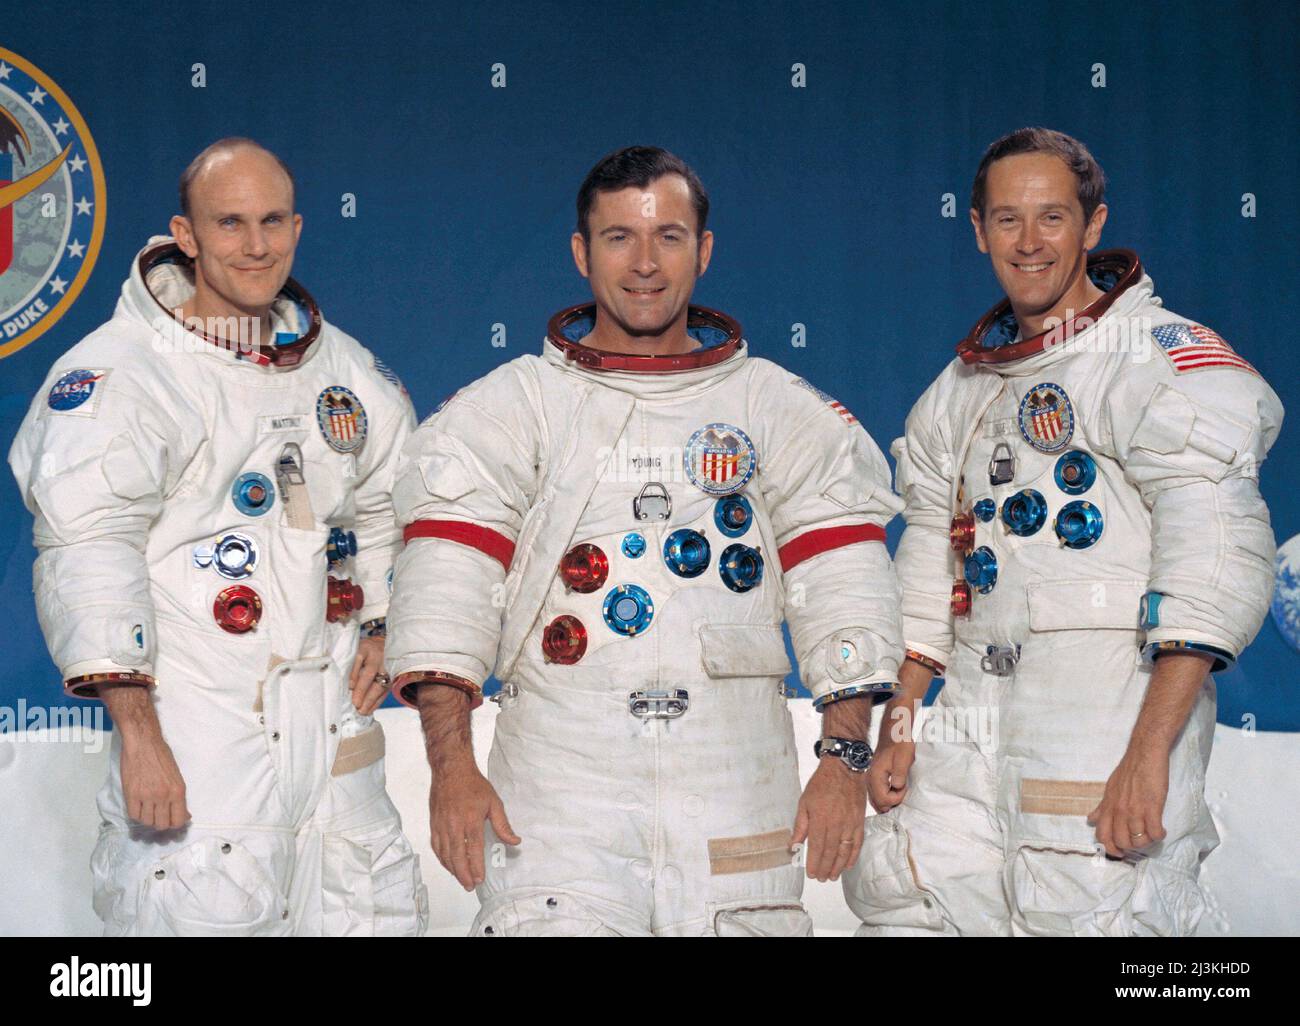 The prime crew of the Apollo 16 lunar landing mission. From left to right: Thomas Mattingly, Command Module pilot; John Young, Commander; and Charles Duke, Lunar Module pilot. Stock Photo